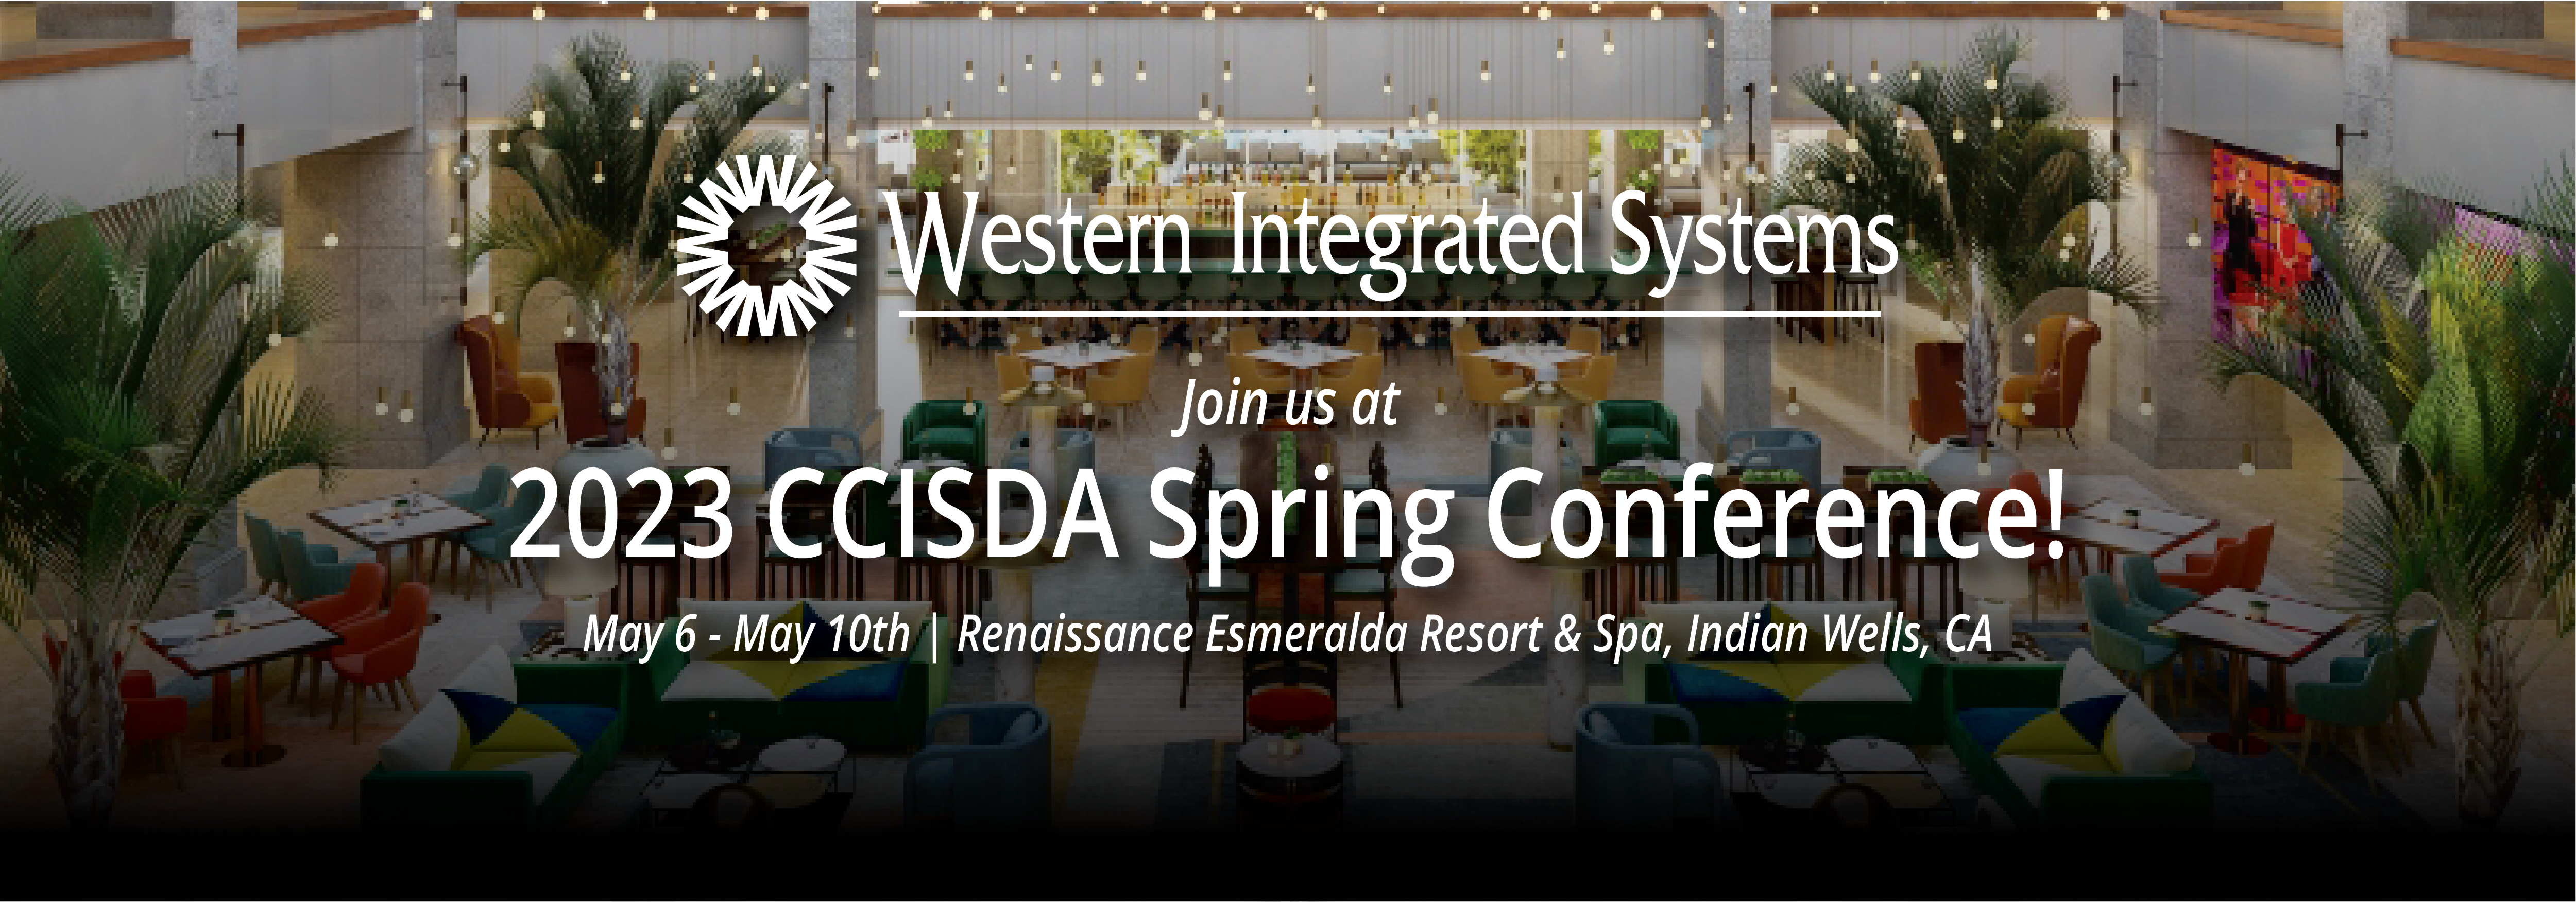 Join WIS at the 2023 CCISDA Conference May 6-10 in Indian Wells